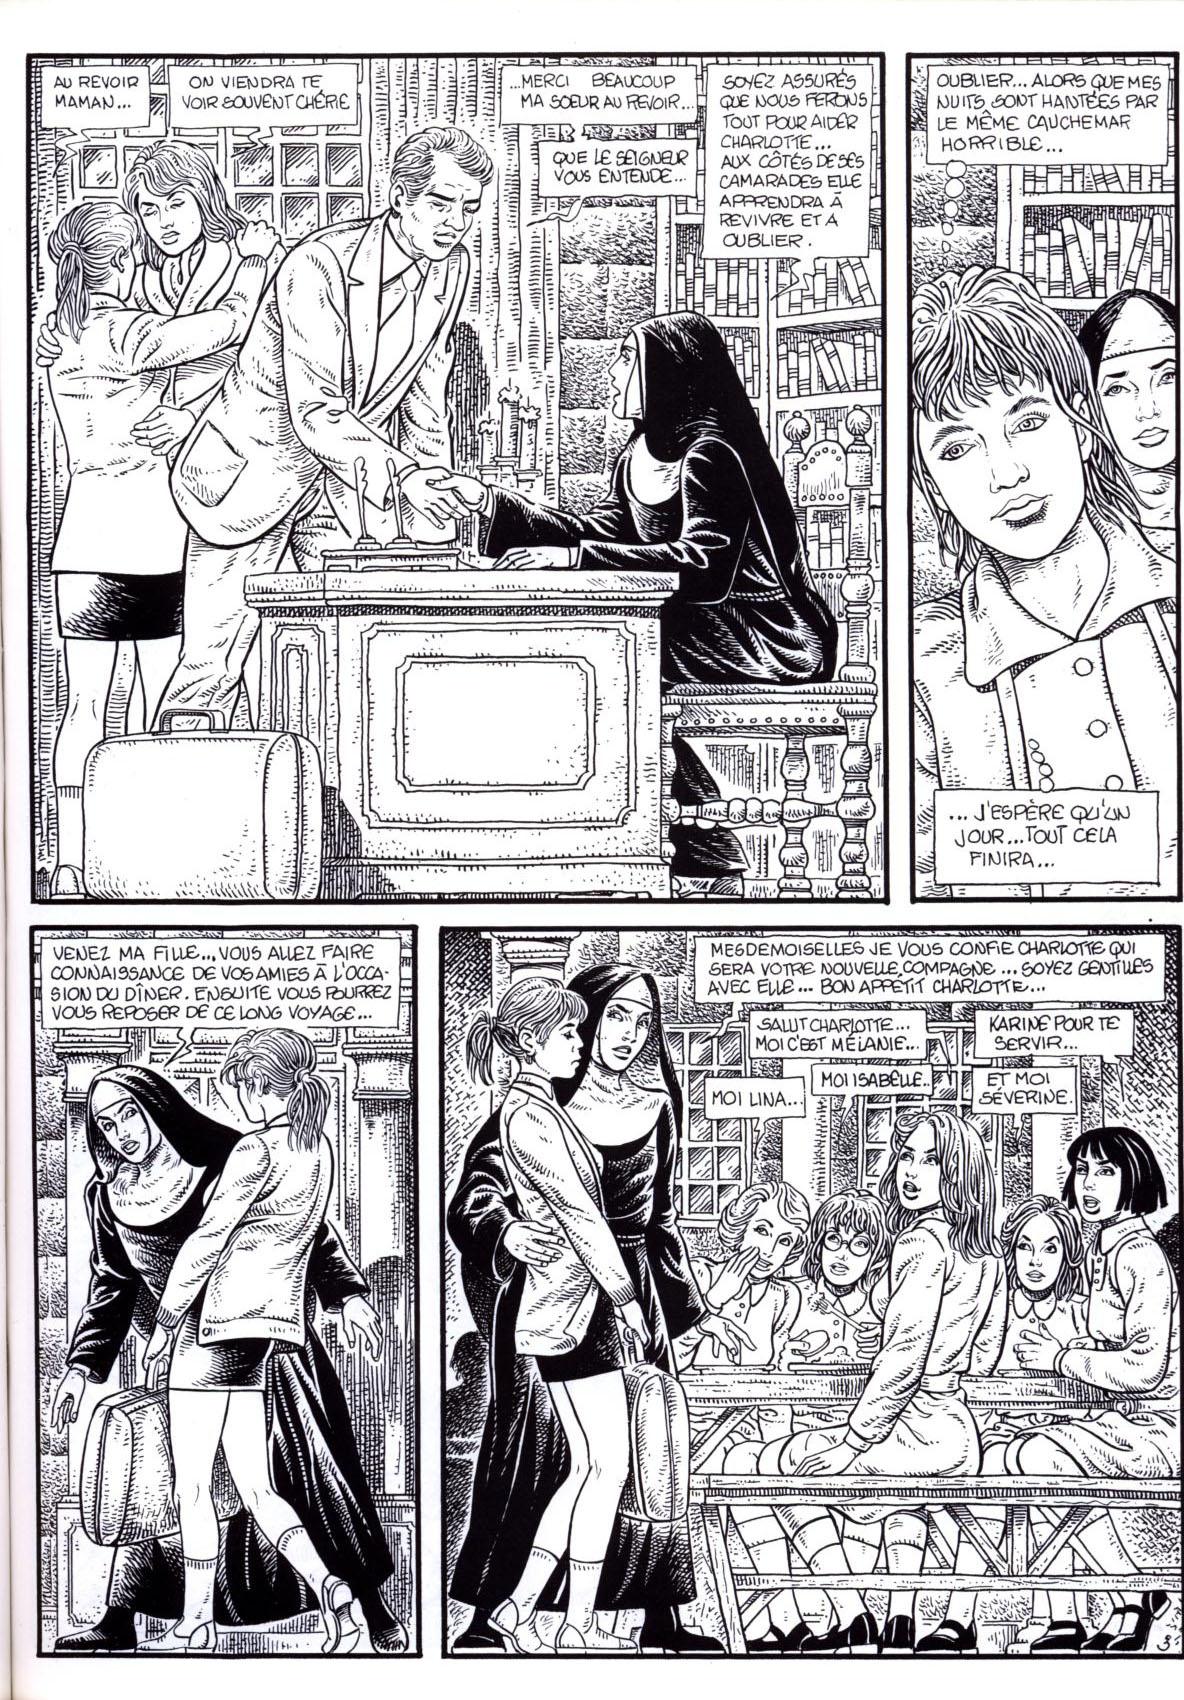 The Mary Magdalene Boarding School - Volume 3 numero d'image 5